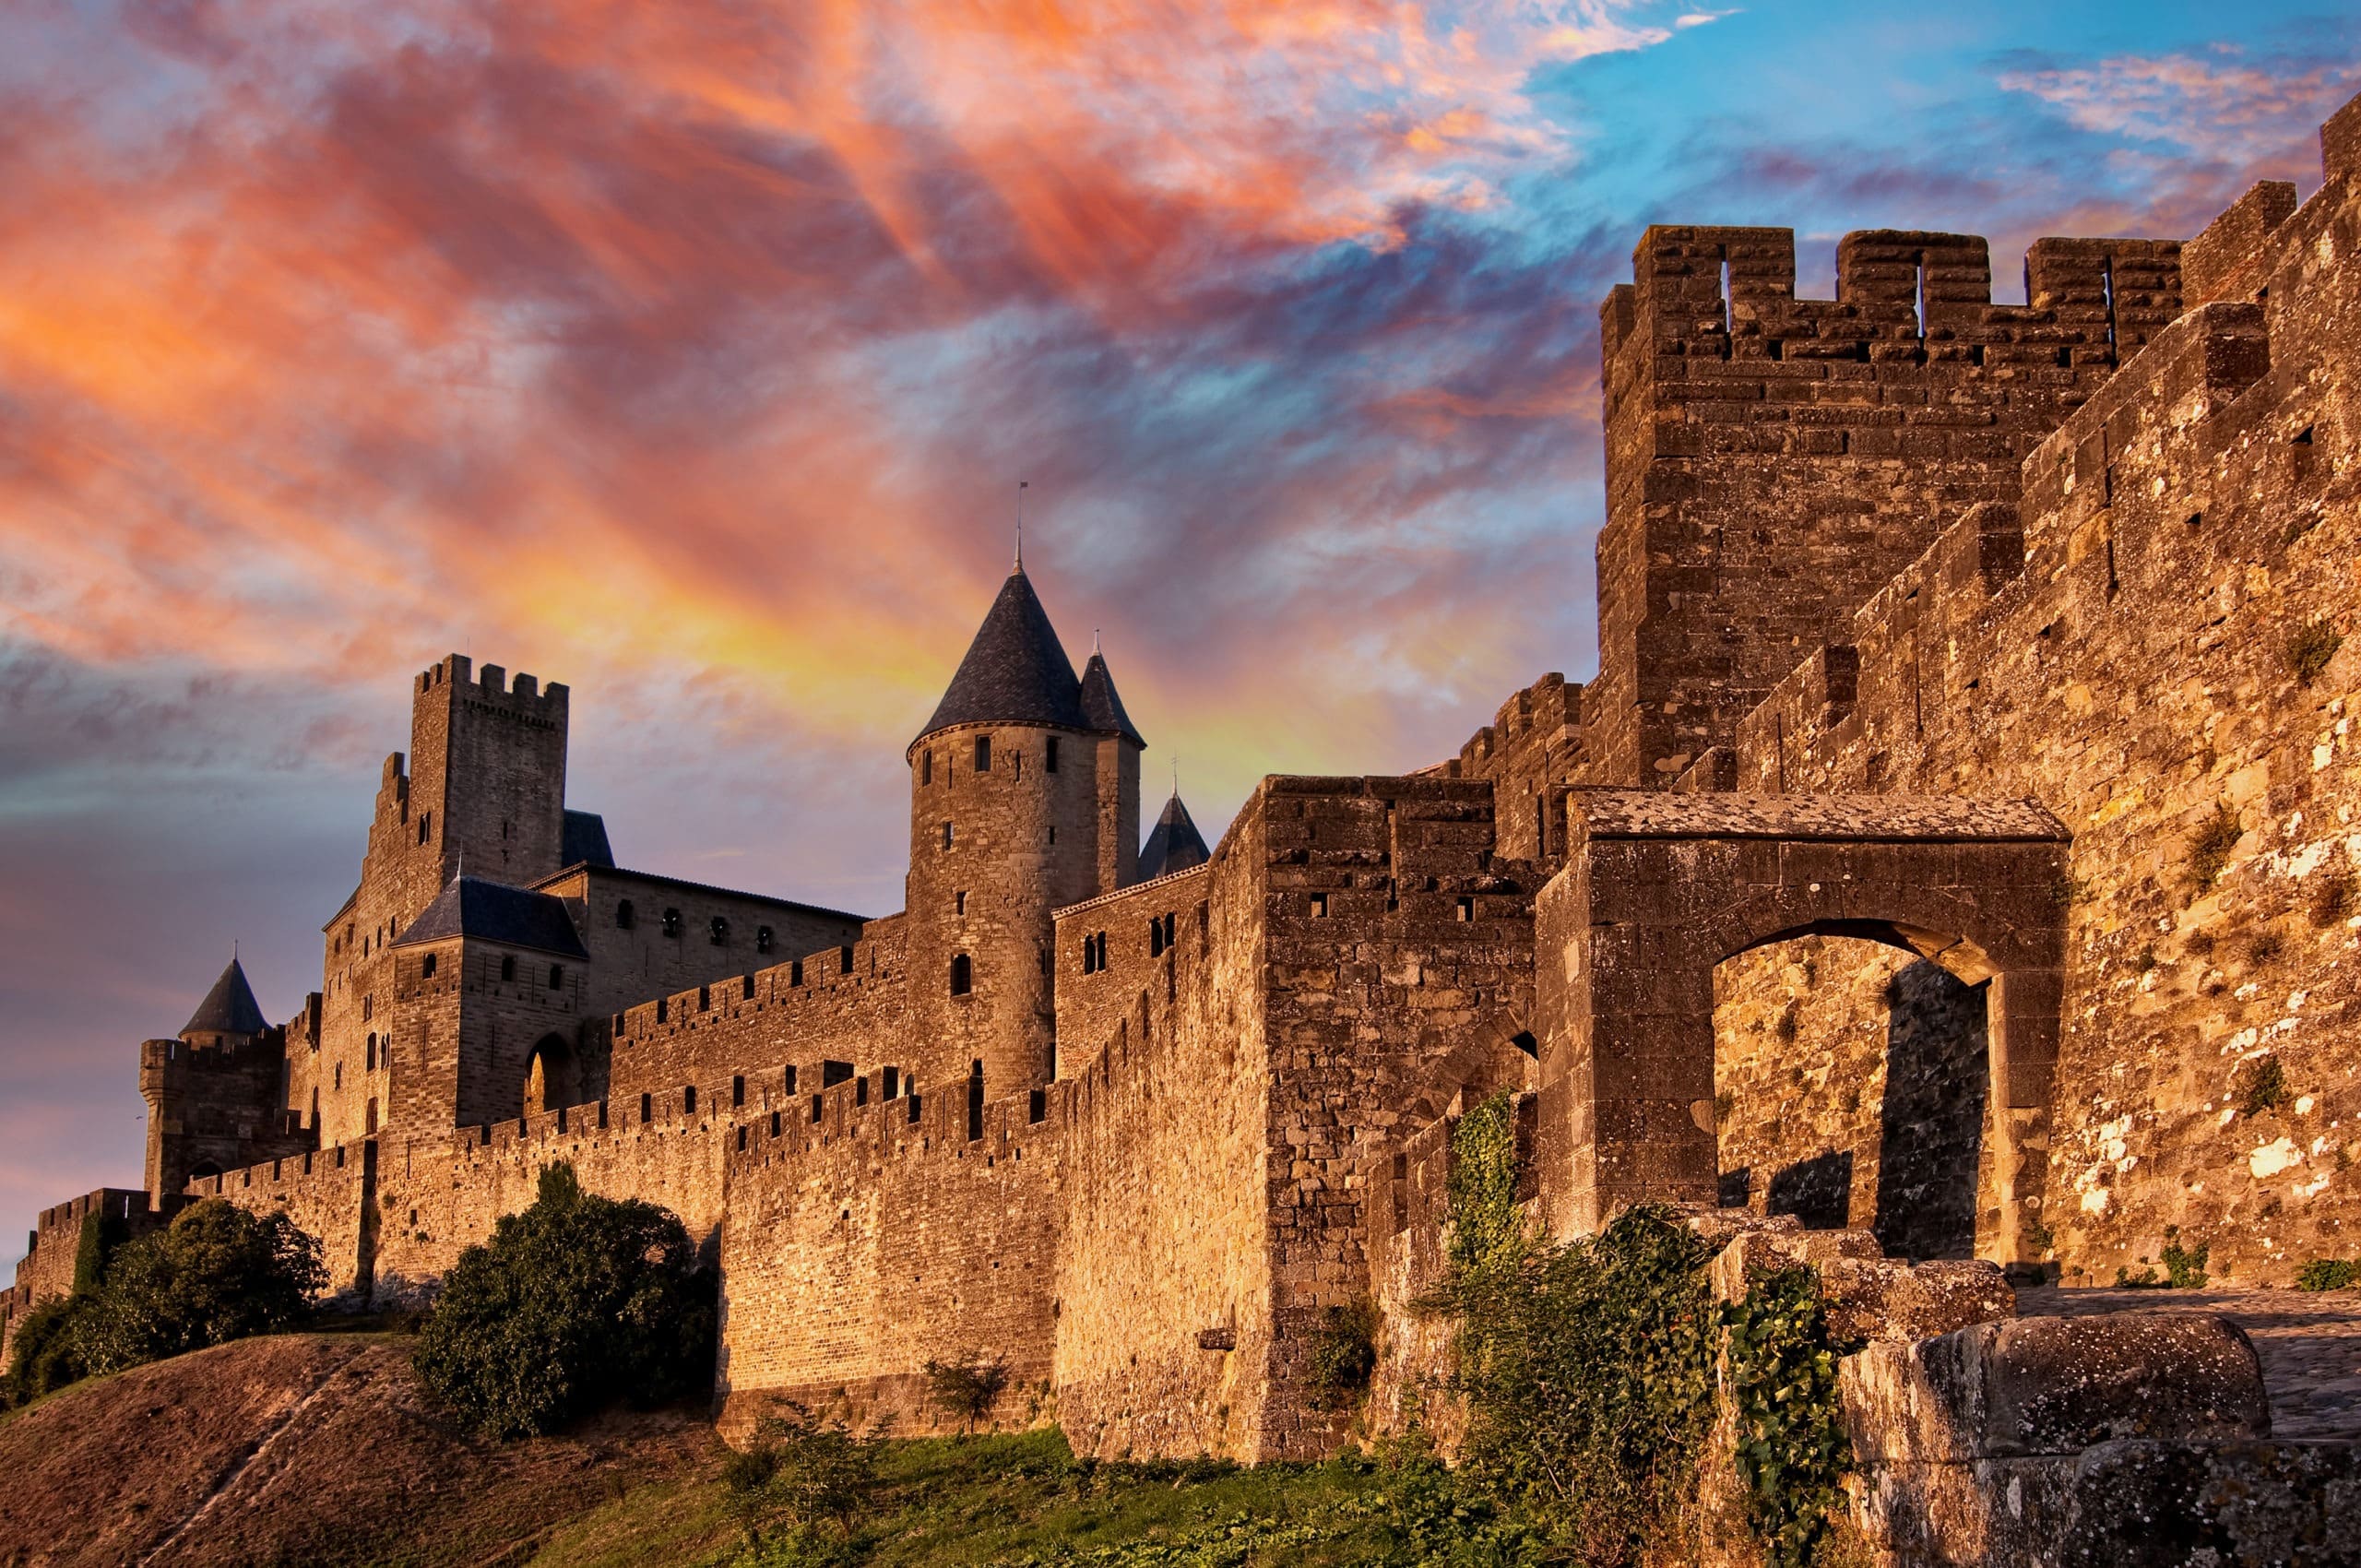 Medieval fortress of Carcassonne at sunset in France.